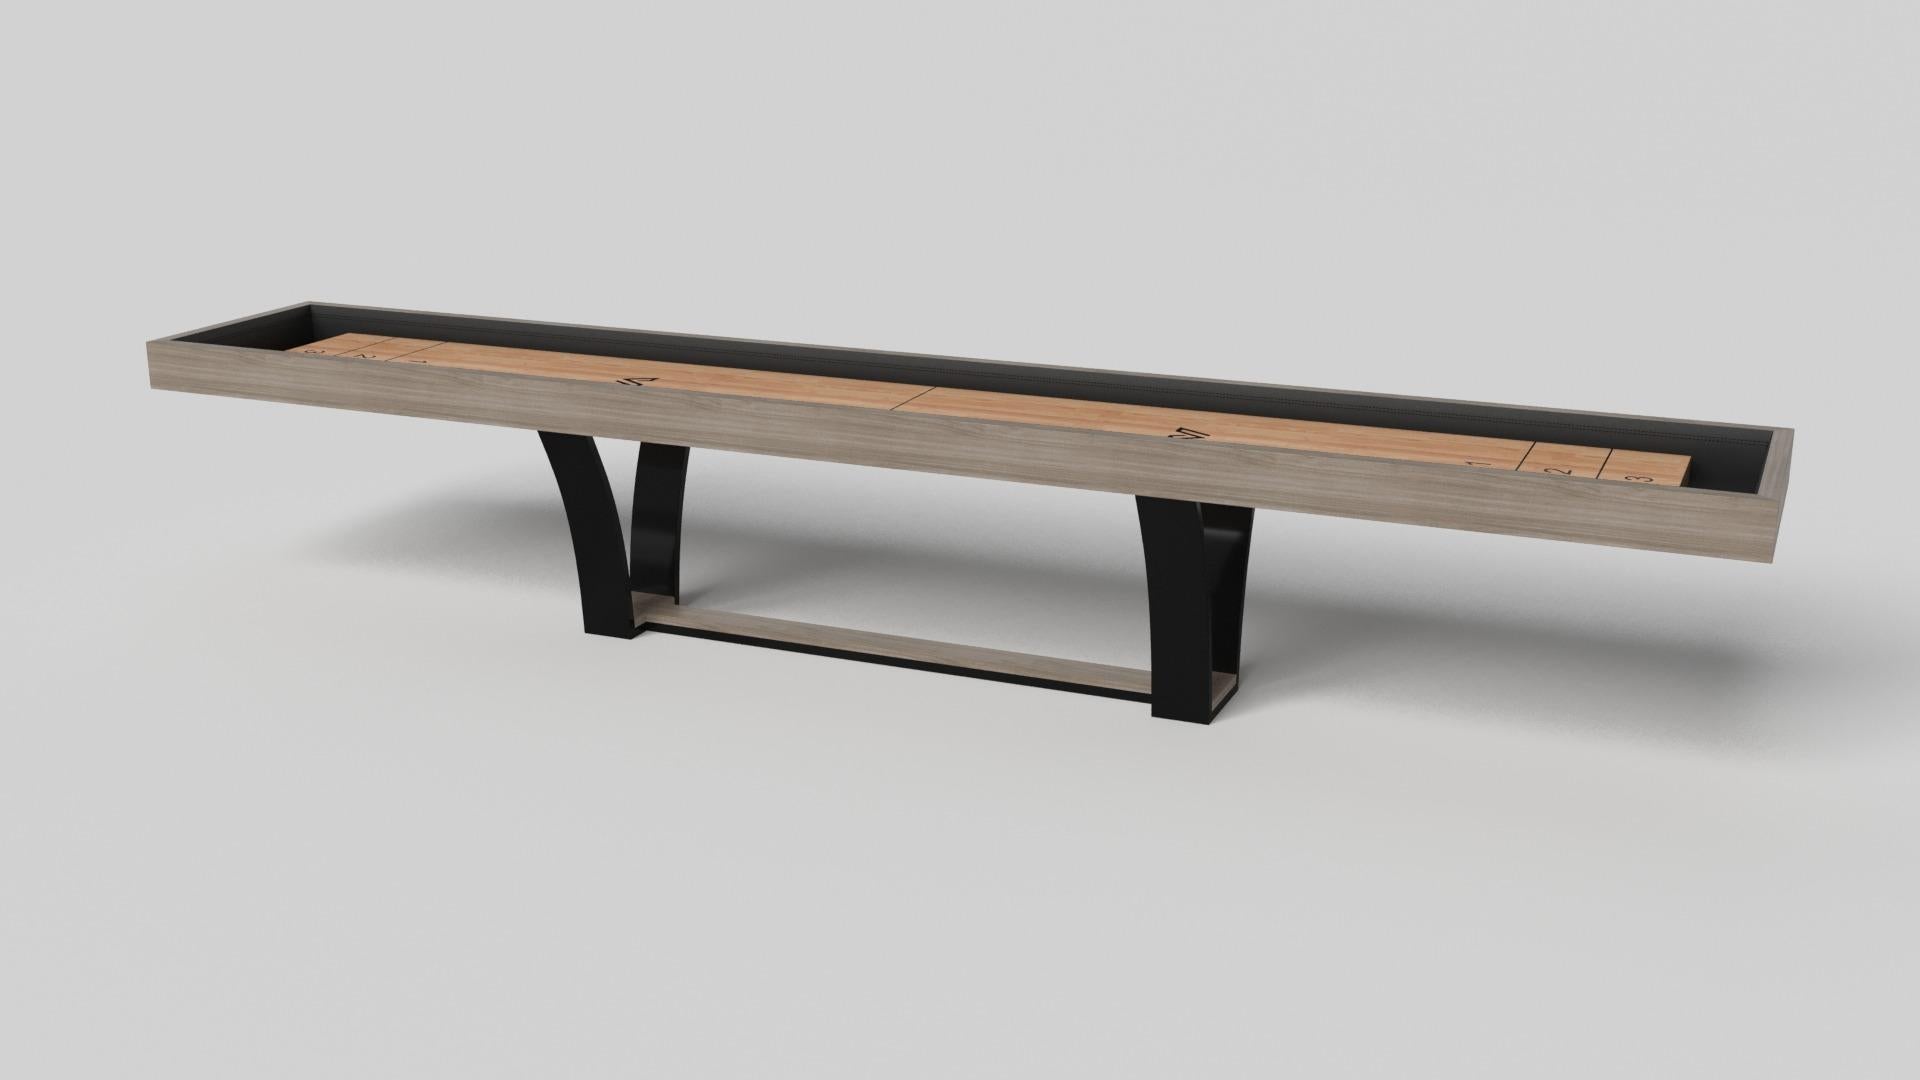 With an I-shaped metal base, slightly sloped metal legs, and a contrasting wood top, the Elite shuffleboard table exudes modern sophistication while evoking a sense of art deco design. This table is a confluence of style, made to meet today's